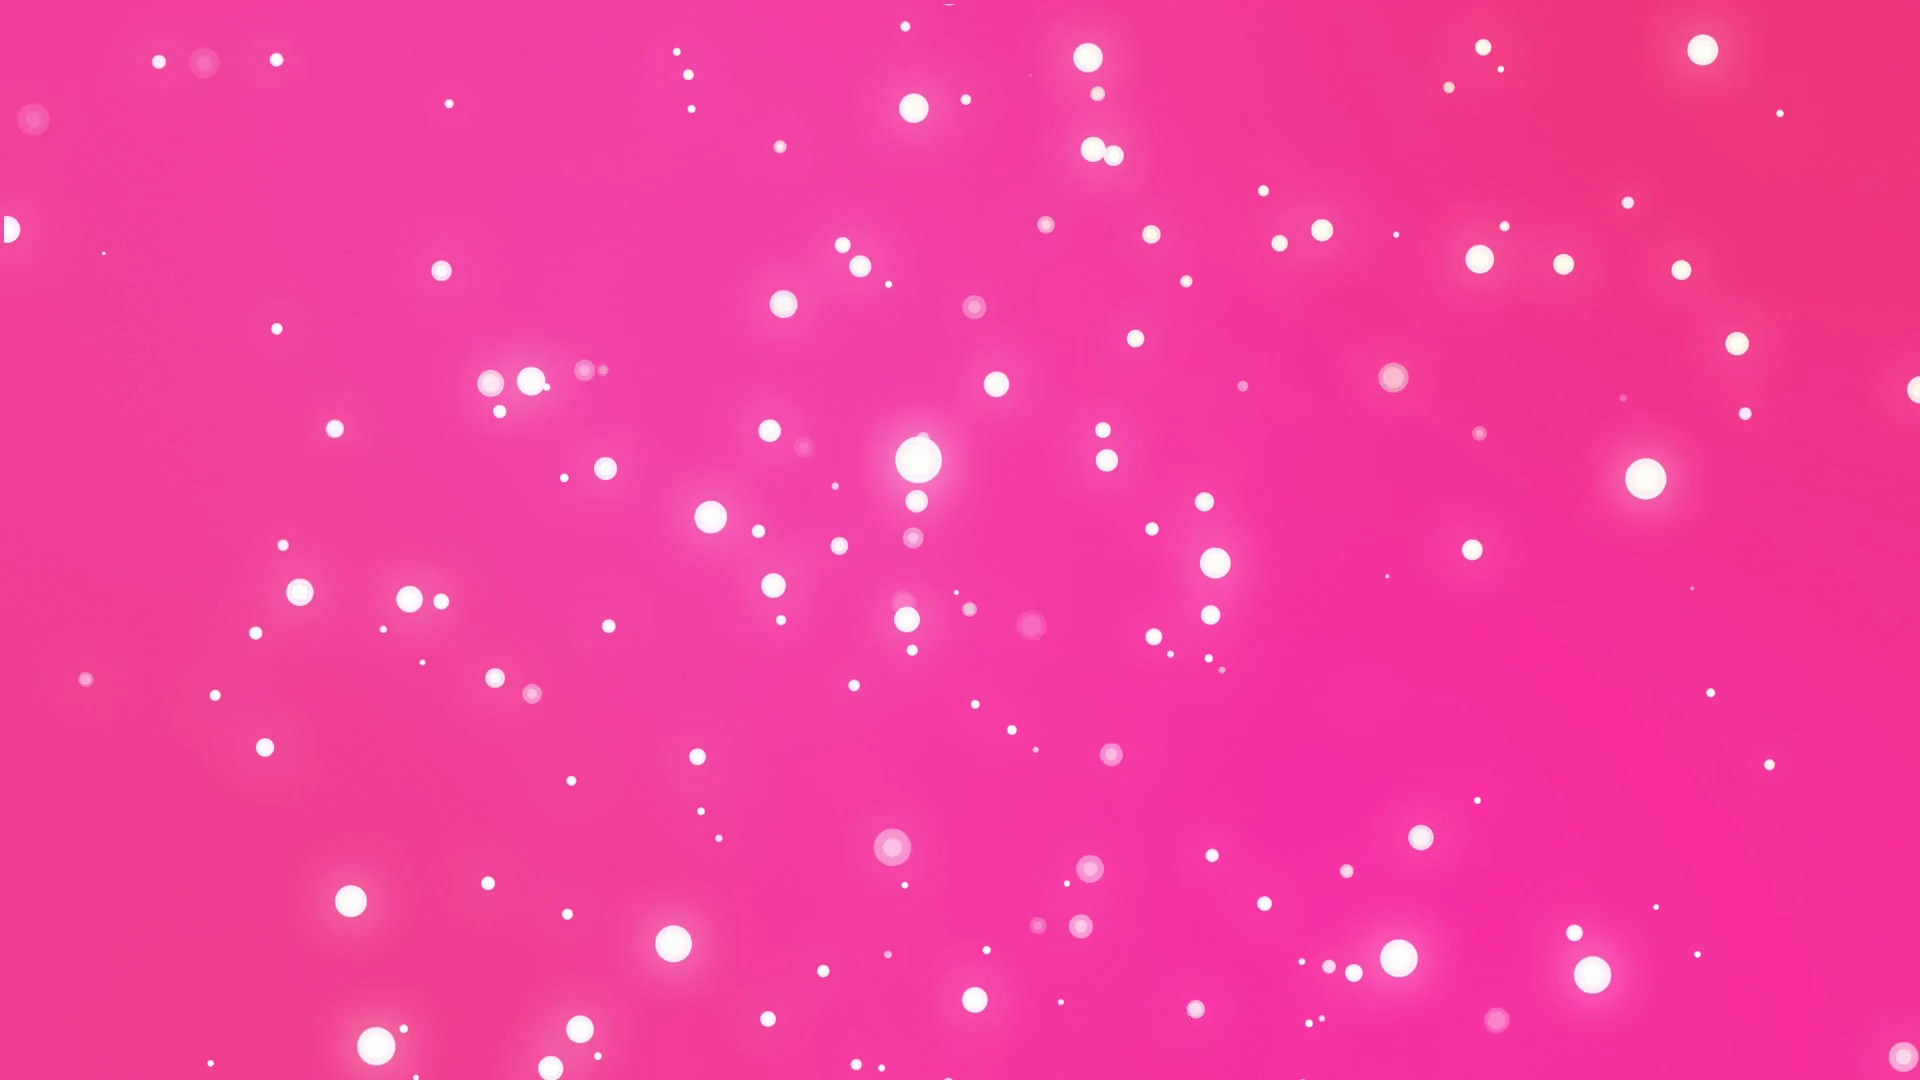 Cute romantic pink gradient background with moving sparkling light ...